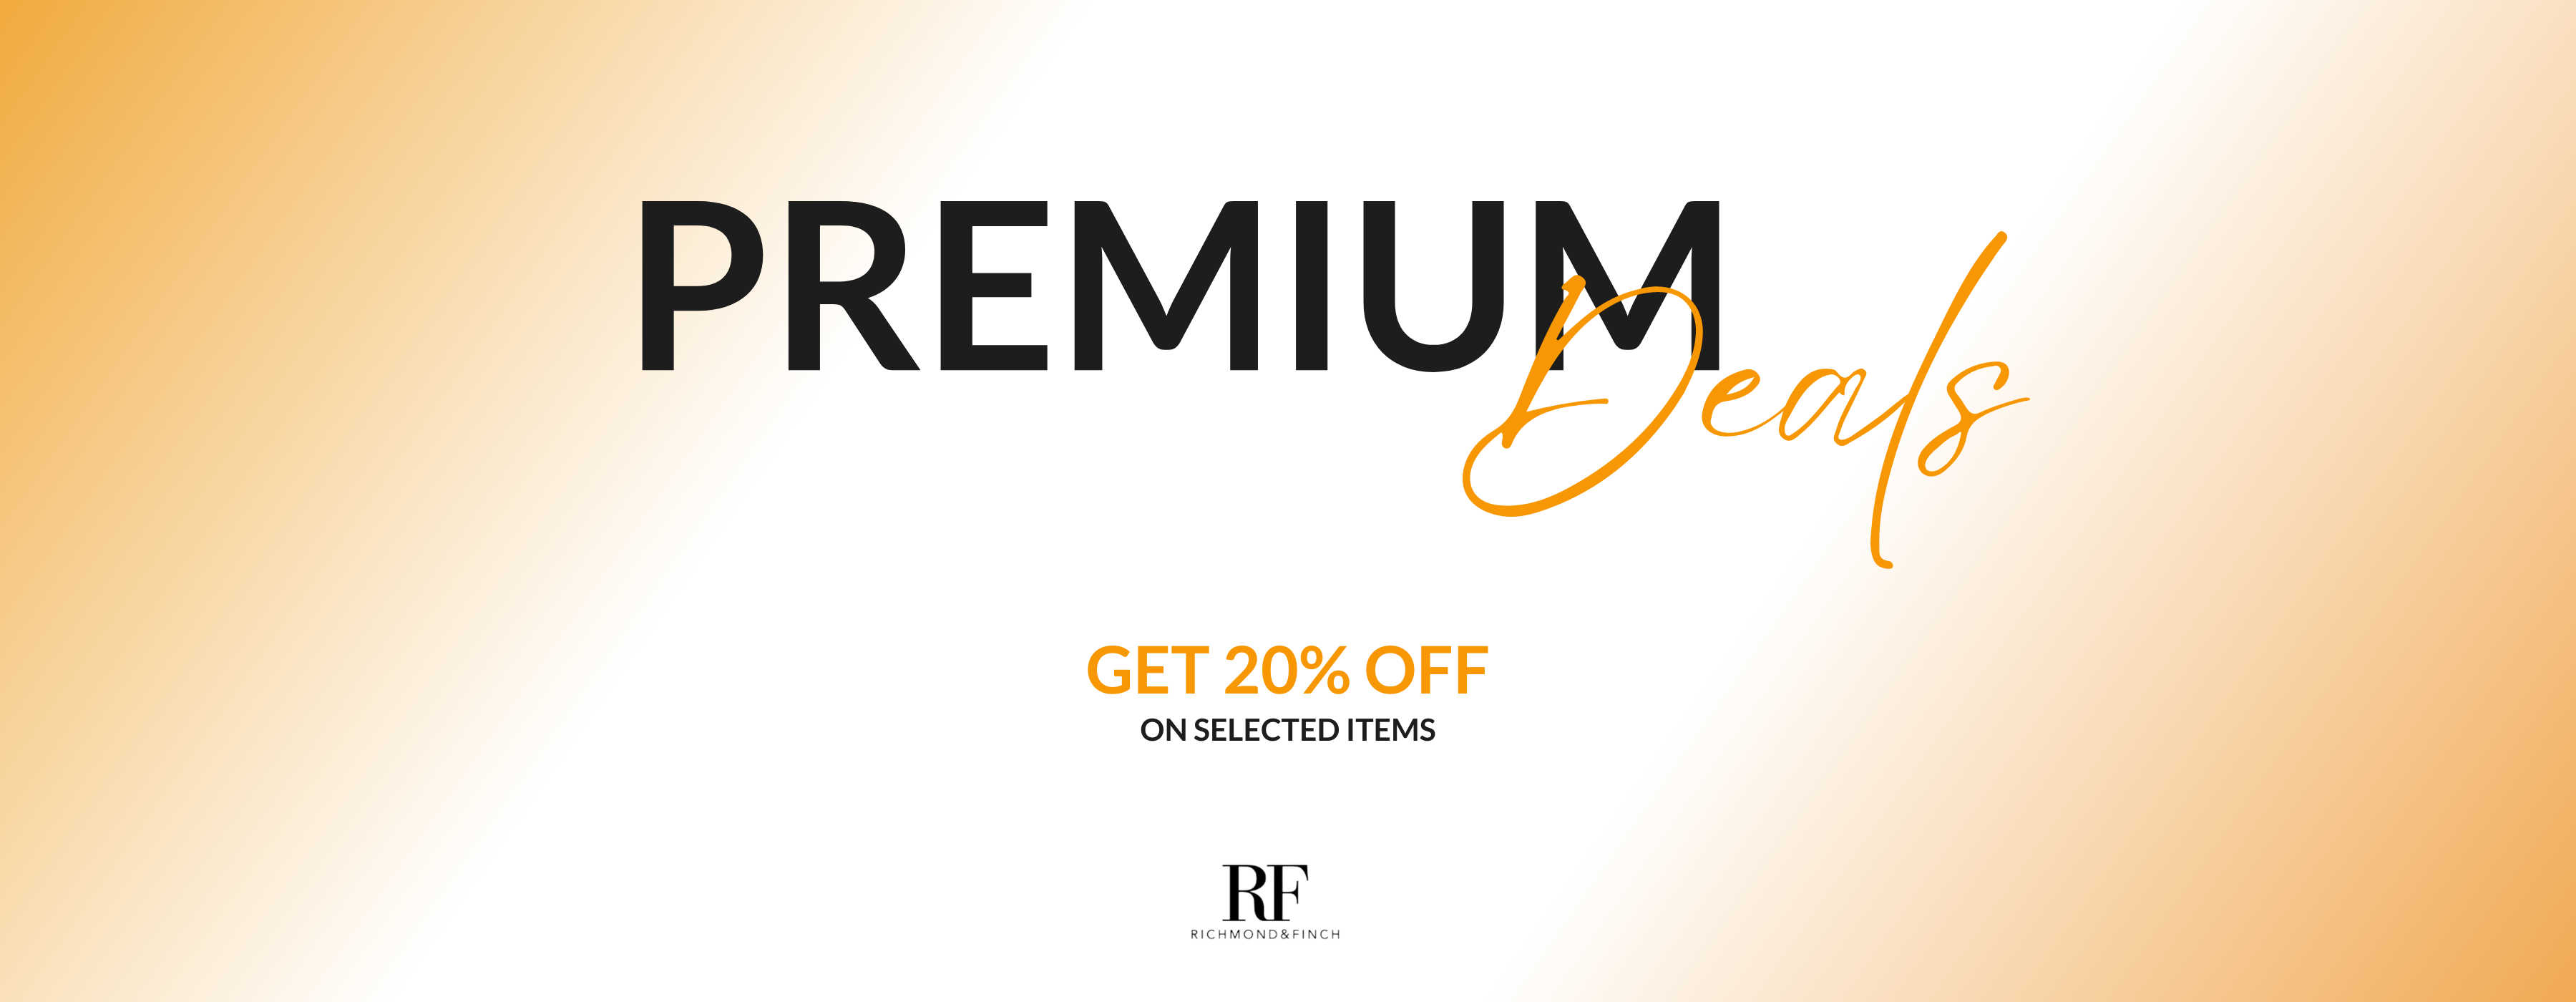 Premium Deals! Get up to 20% off on select Richmond and Finch products.